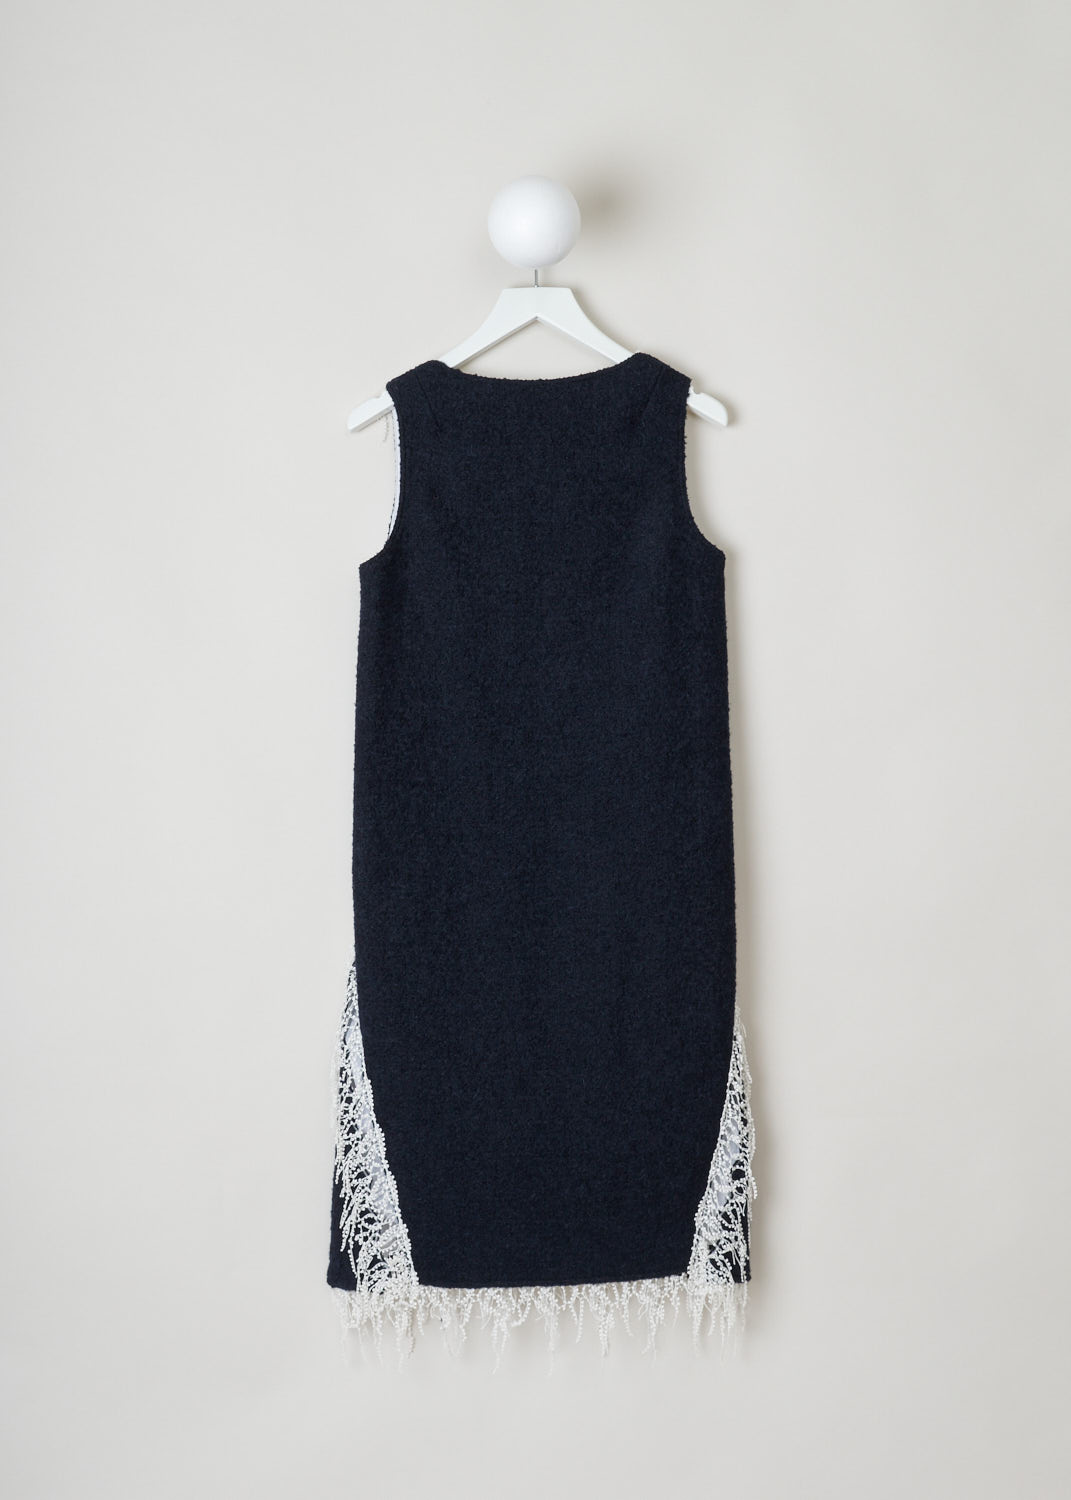 Calvin Klein 205w39nyc, Navy a-line dress with decorative neckline, 84WWDE52_W220_416, black, back, A-line dress crafted of a navy bouclé wool. Featuring a V-neckline and open laser-cut seams and white trims. Furthermore, the dress has a knee length and a concealed zipper on the left side.